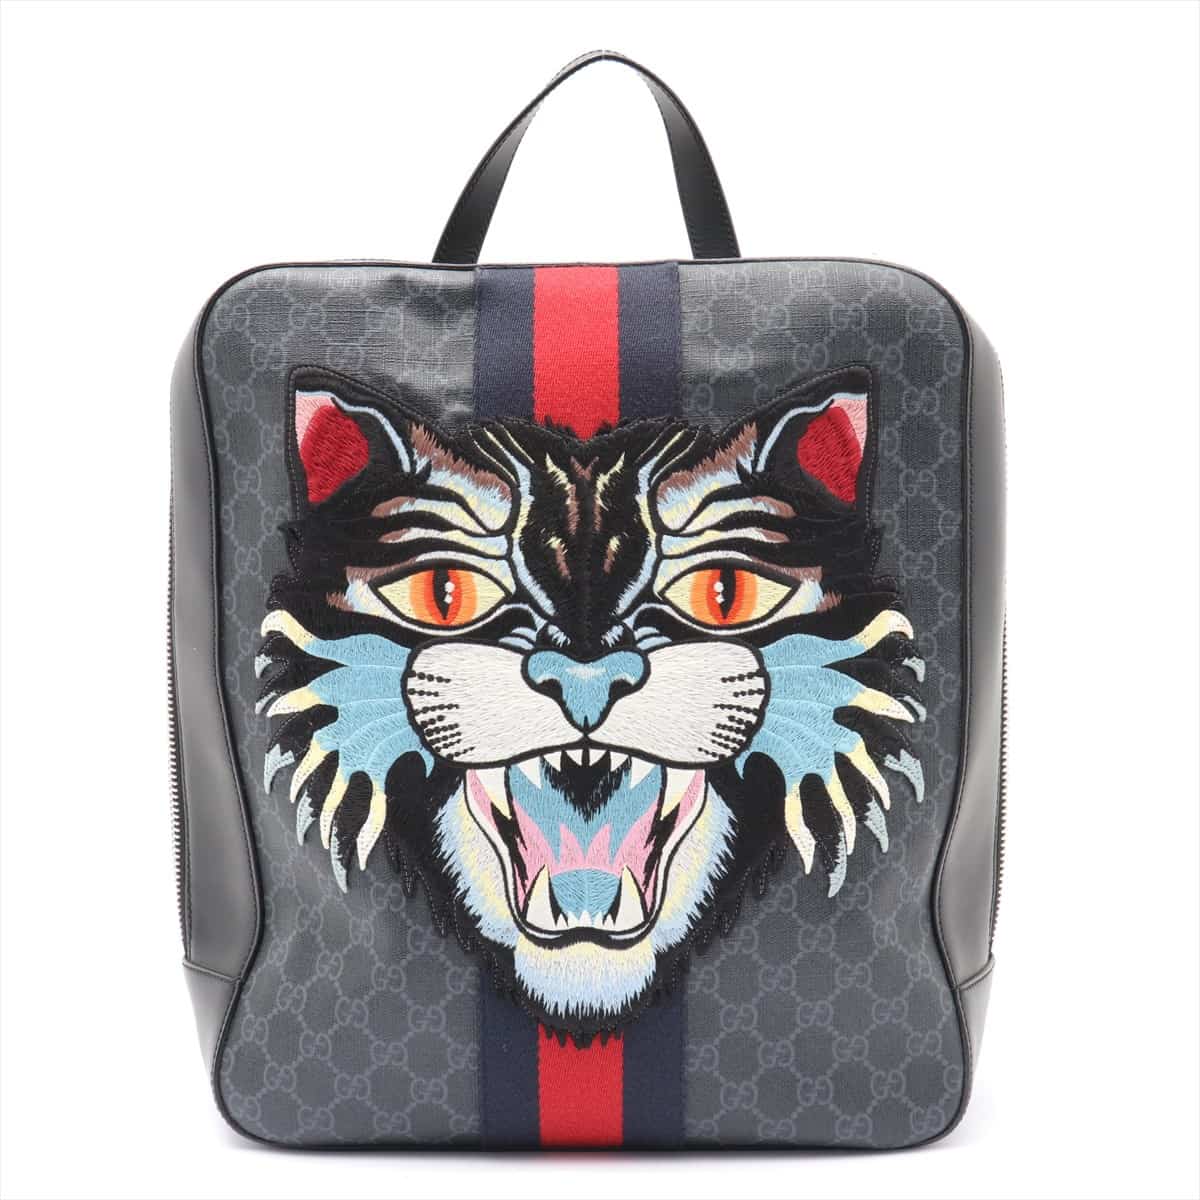 Gucci GG Supreme Angry cat Backpack Black 478324